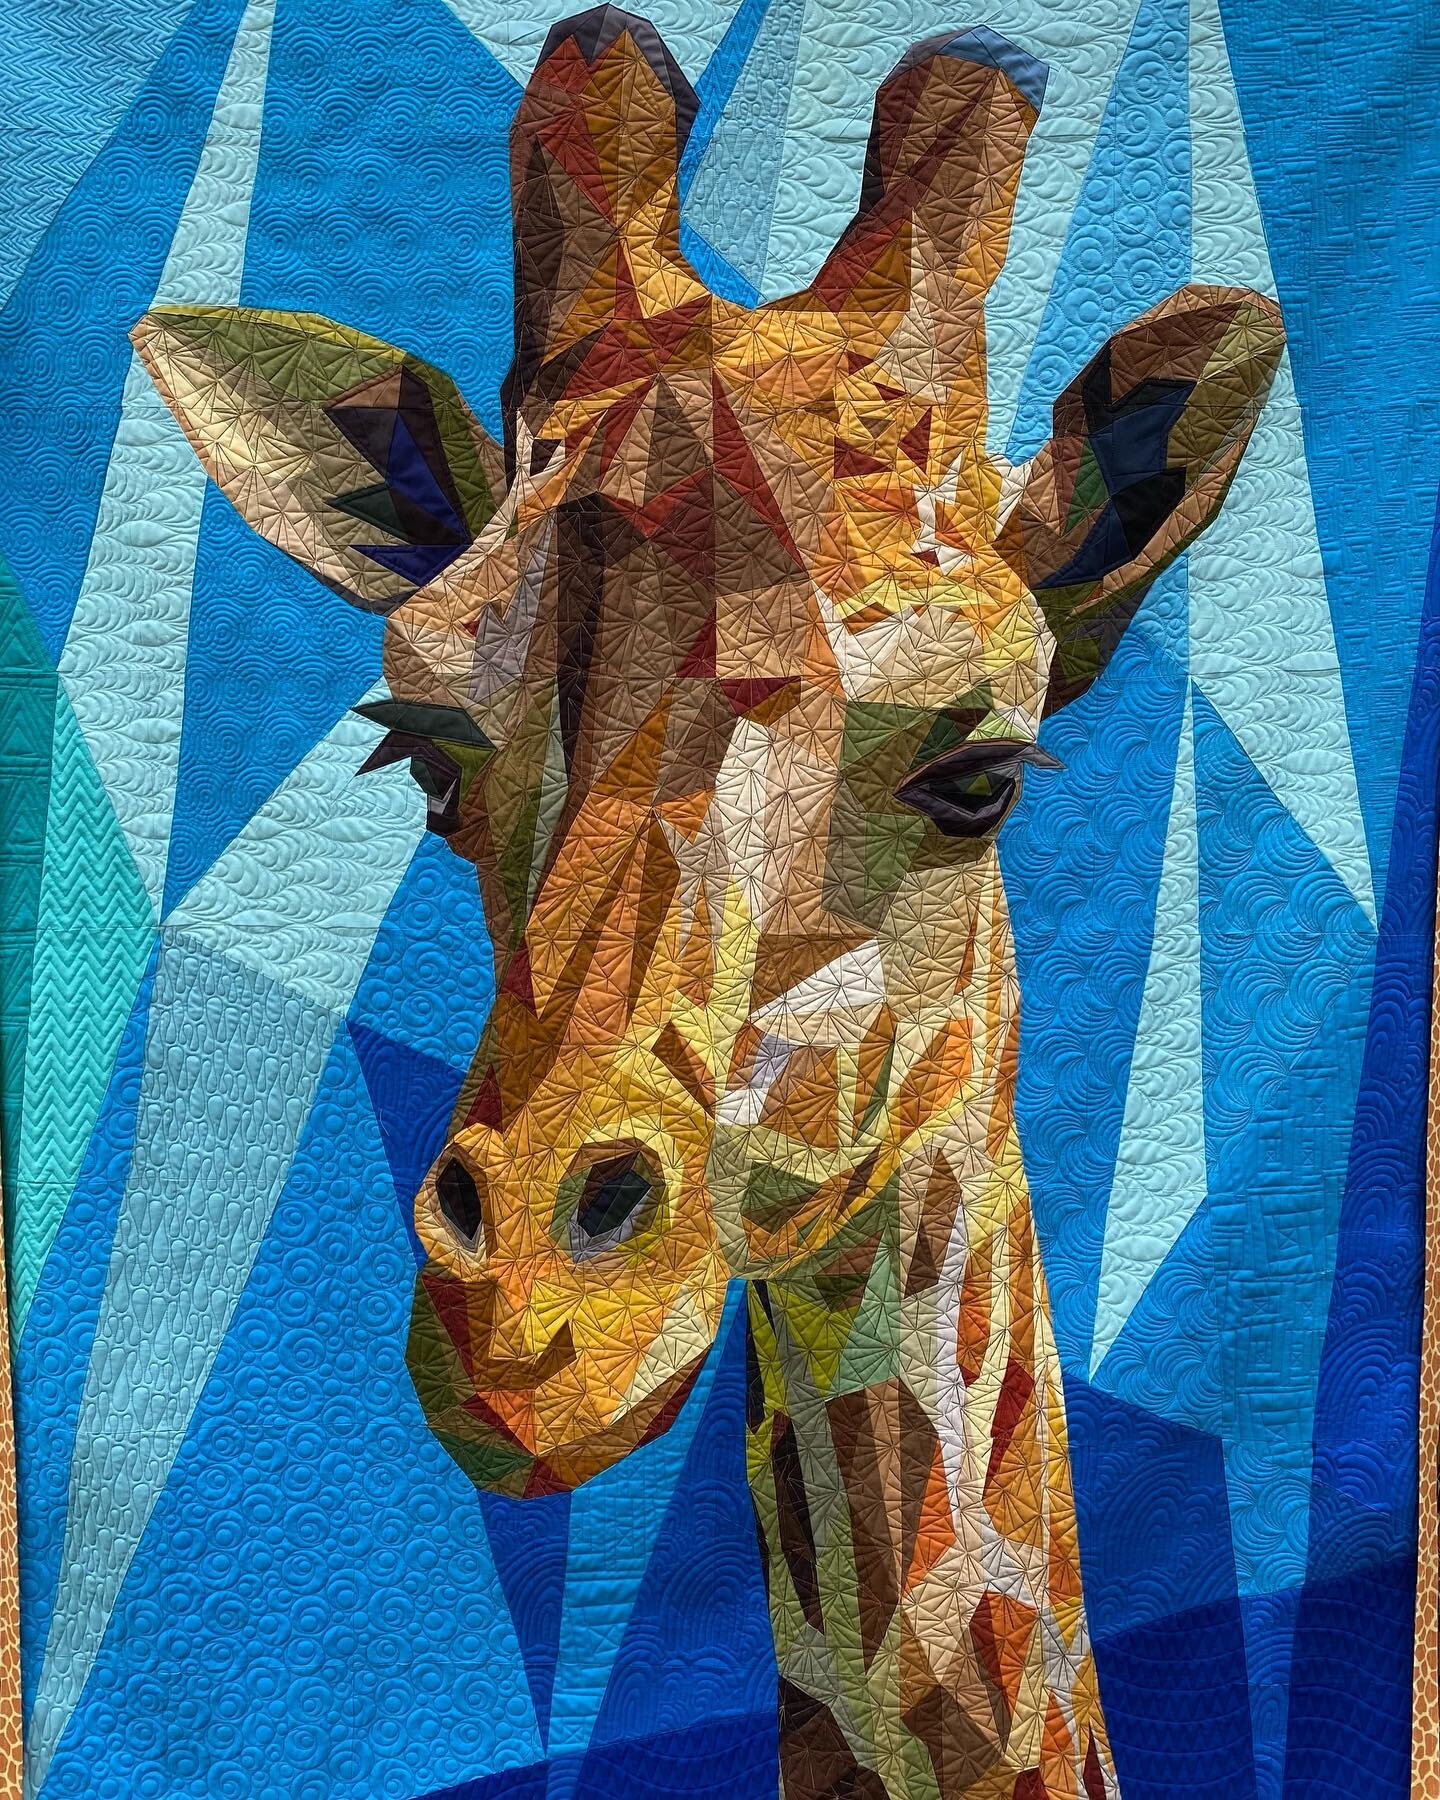 Custom quilting for Big G The Giraffe! 24 hours-12 patterns-10 different color threads. Thank you Holly P. for choosing 207lq for your quilting services. #biggthegiraffe #legitkits #longarmquilting #longarmquilter #207lq #gammill #gammillquilting #st